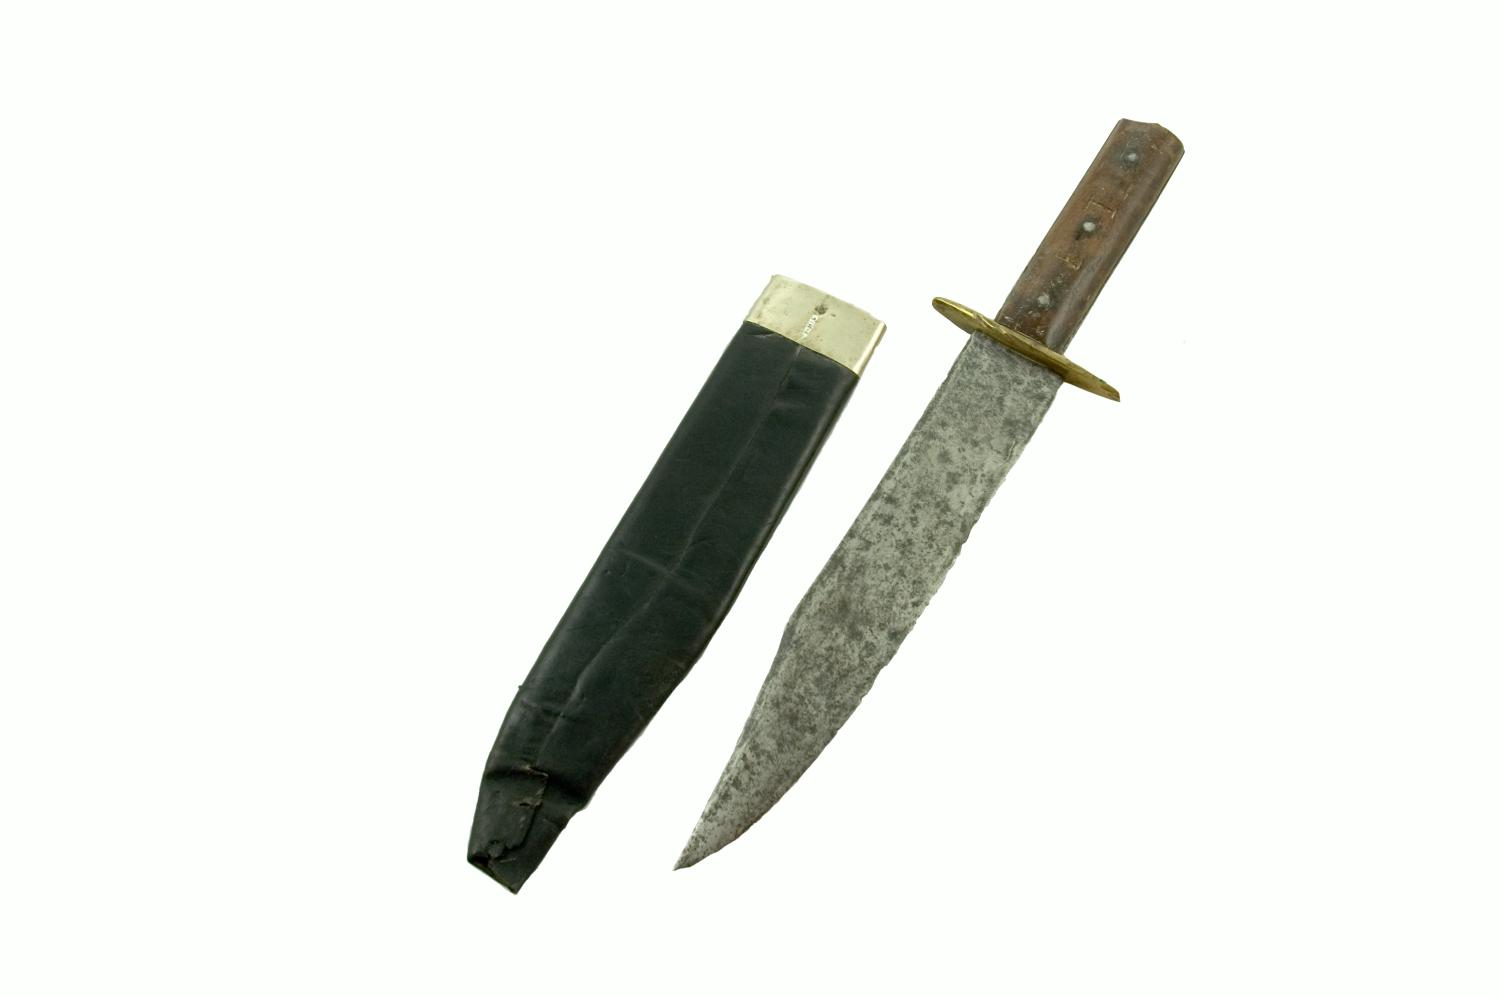 Bowie knife and sheath
                                                
                                                    [Sequence #]: 1 of 1
                                                